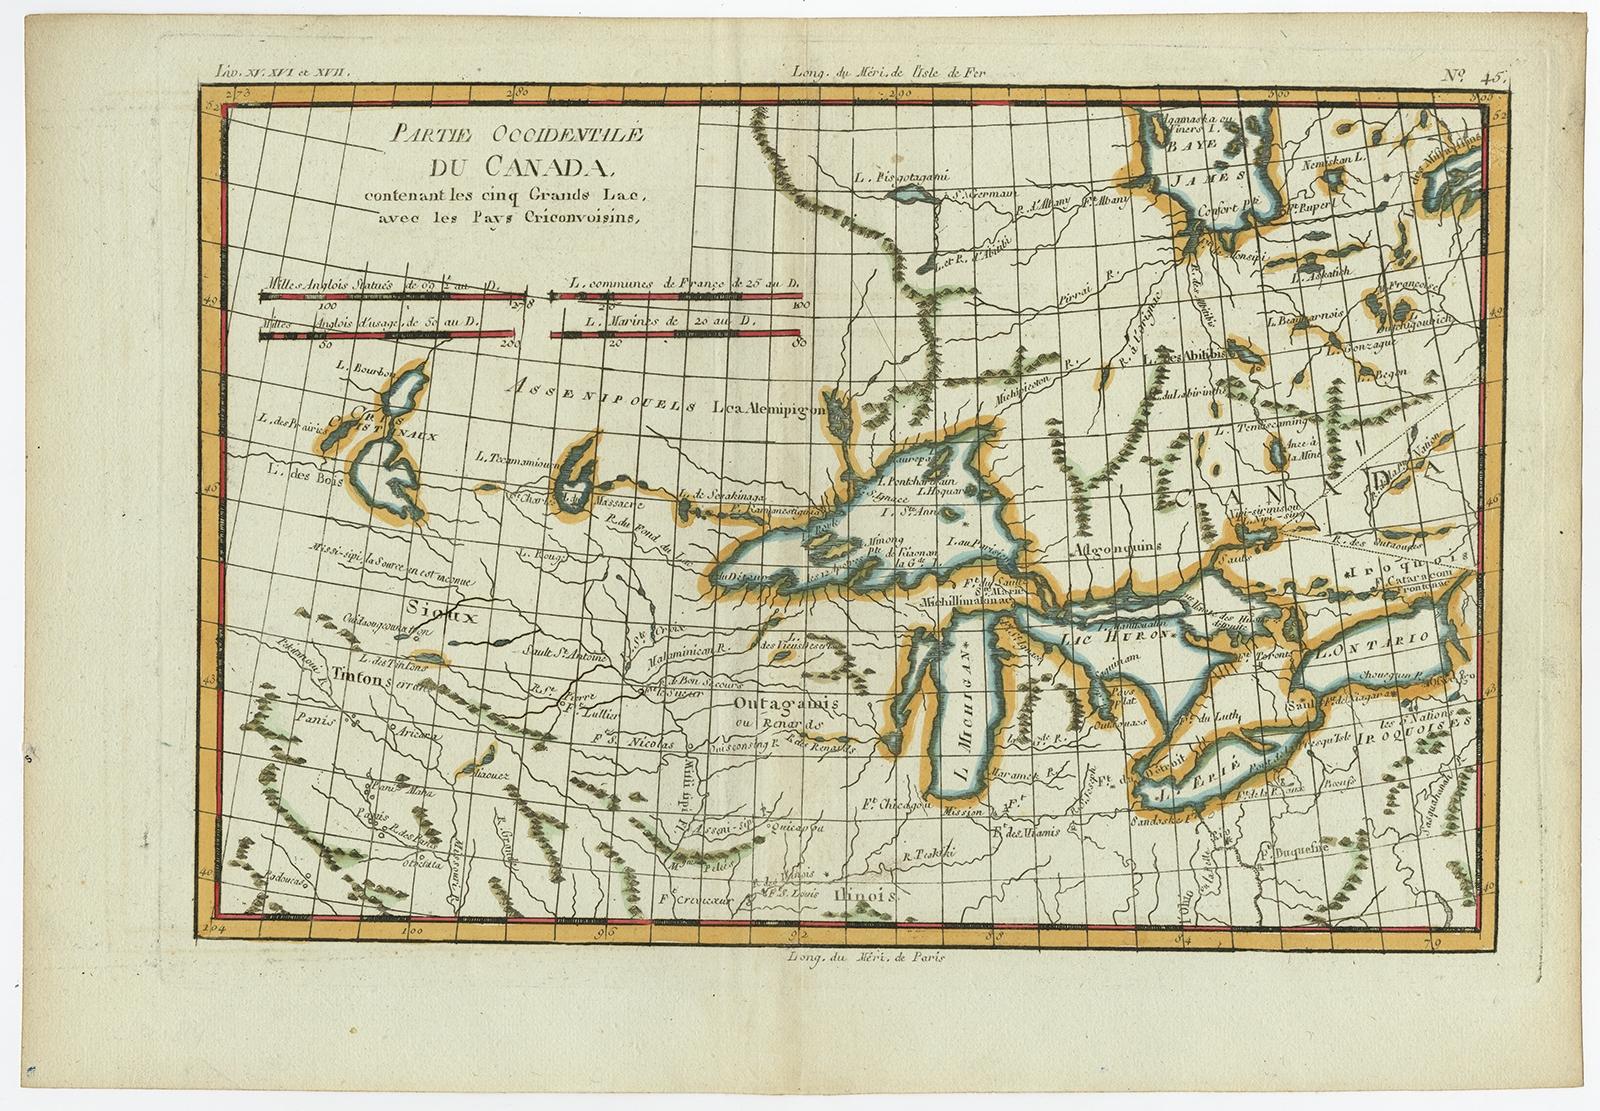 Antique map titled 'Partie Occidentale du Canada'. 

A fine example of Rigobert Bonne and Guilleme Raynal's 1780 map of the Great Lakes and upper Mississippi Valley. 

A map of considerable importance, this chart was constructed during a period